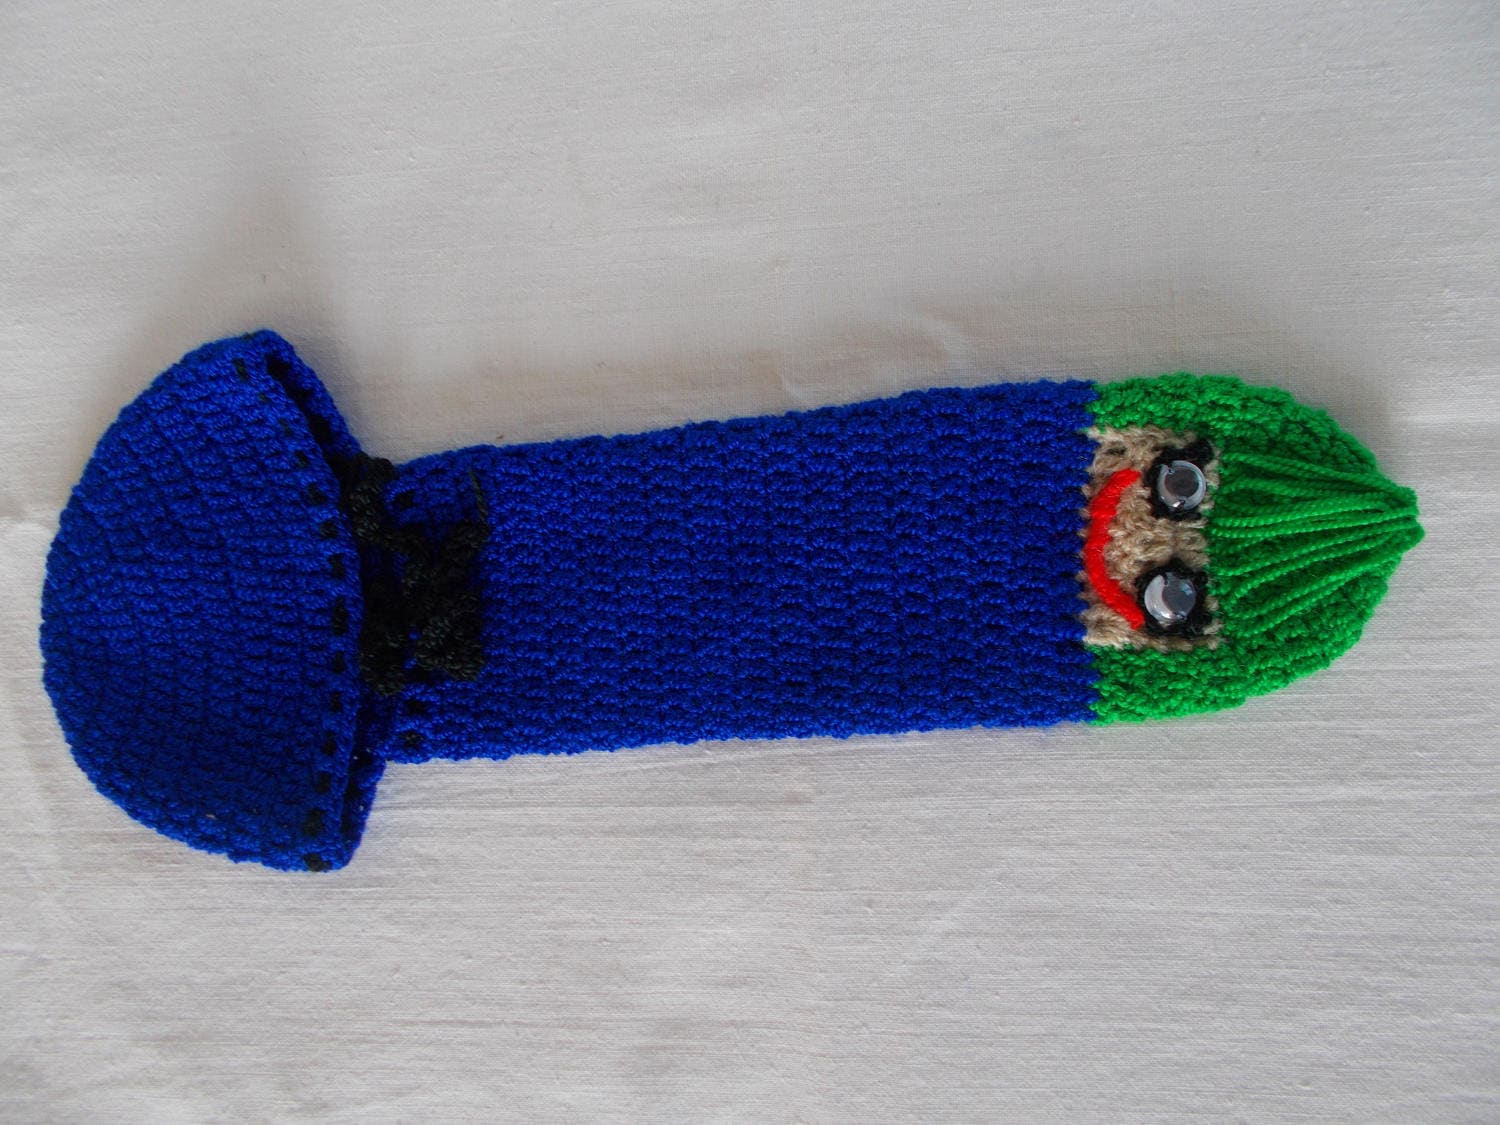 PENIS WARMER COCK SOCK (or vibrator cozy) Don’t keep your favorite appendag...